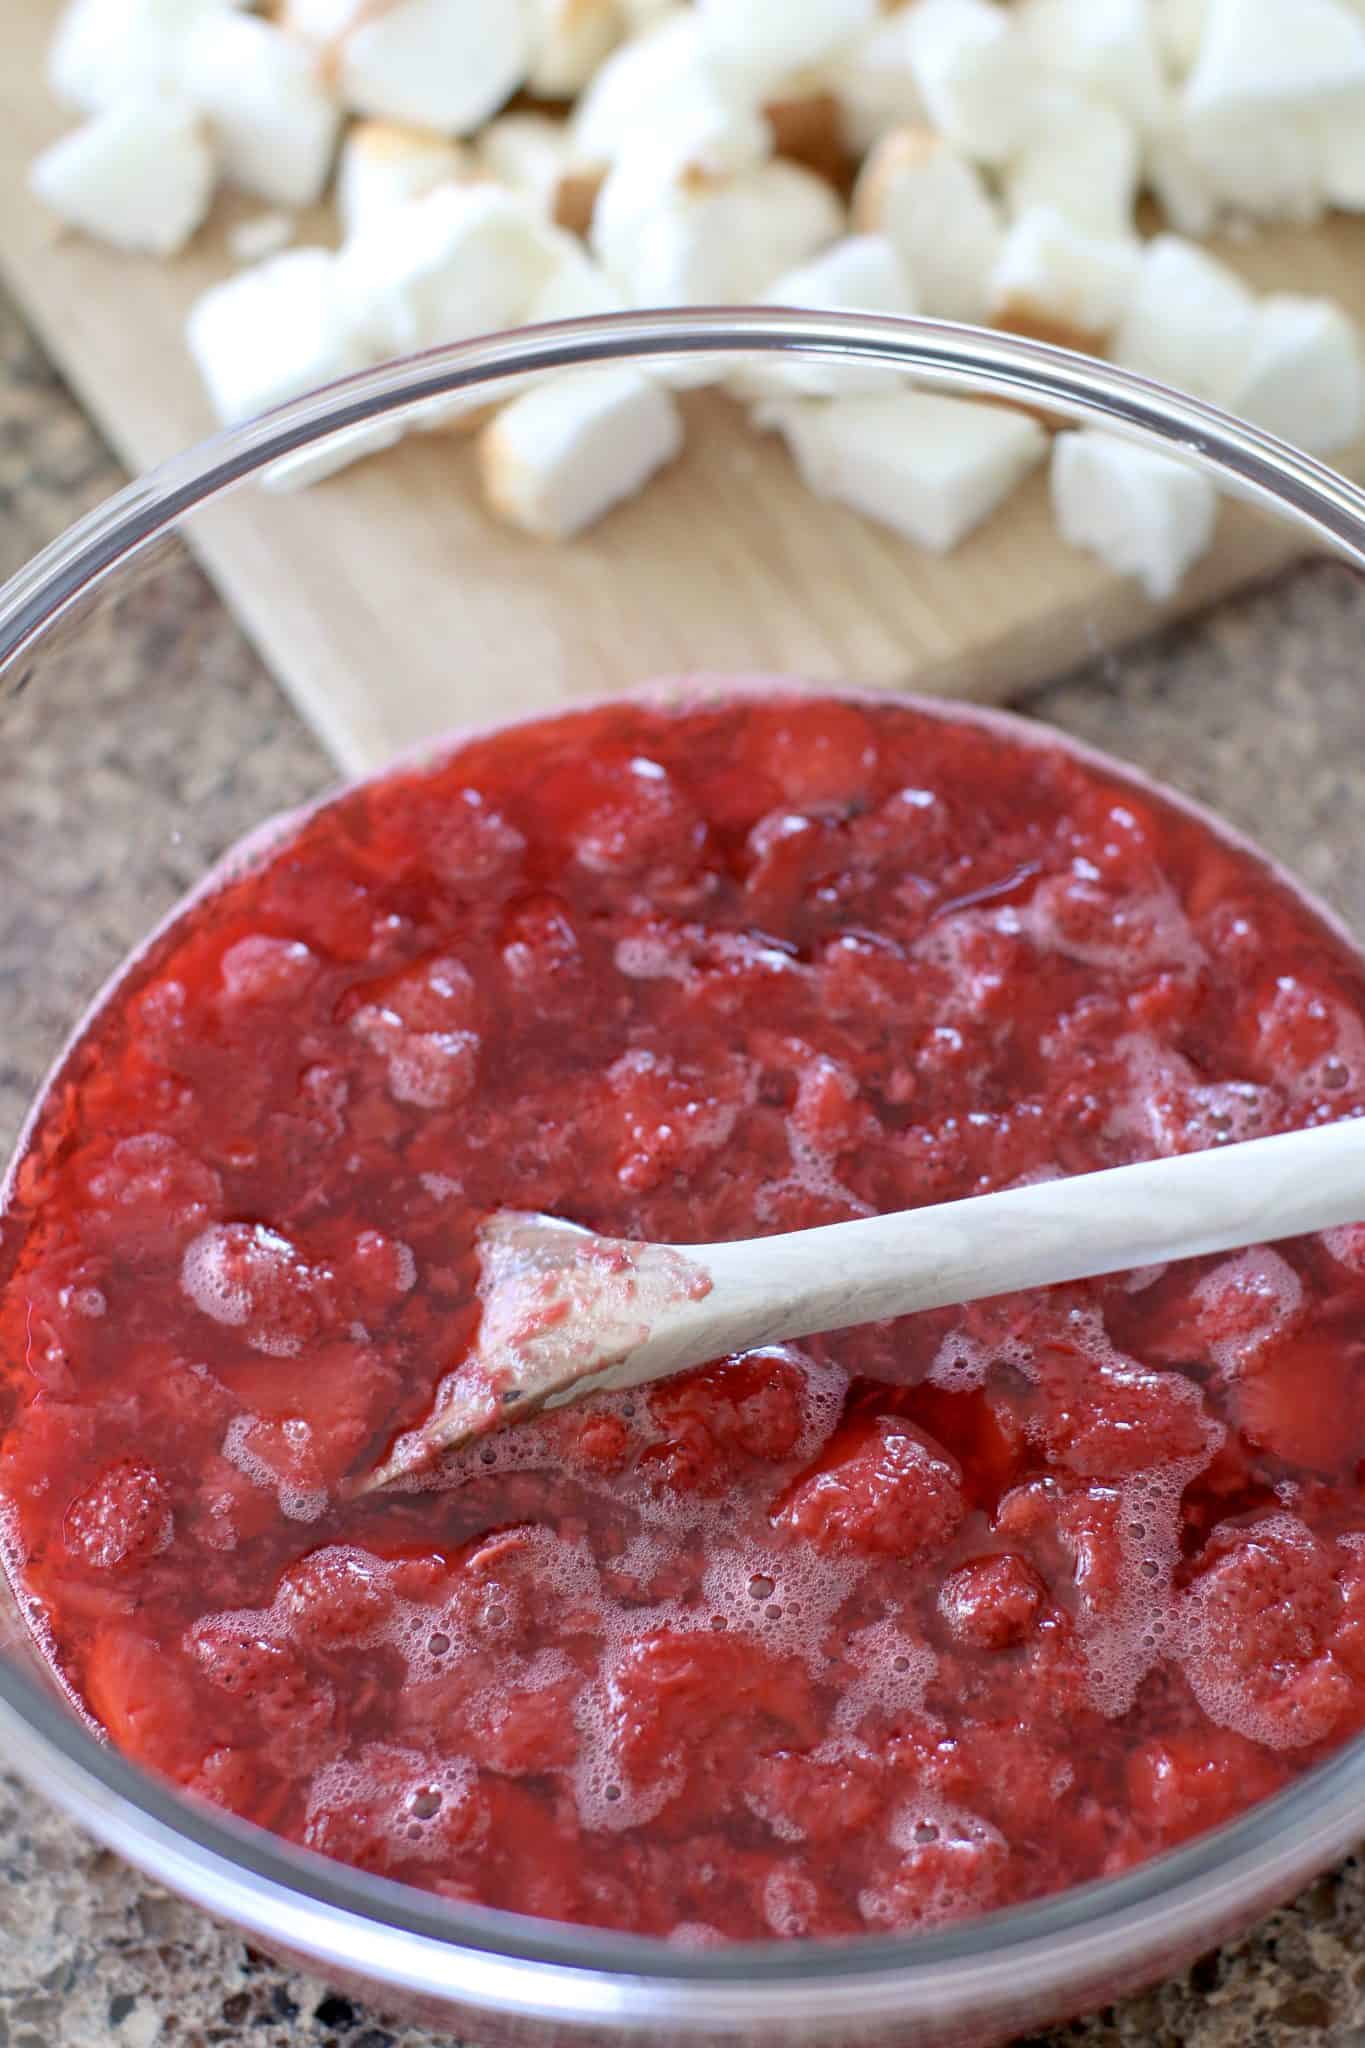 frozen strawberries mixed together with strawberry gelatin mixture in glass mixing bowl.